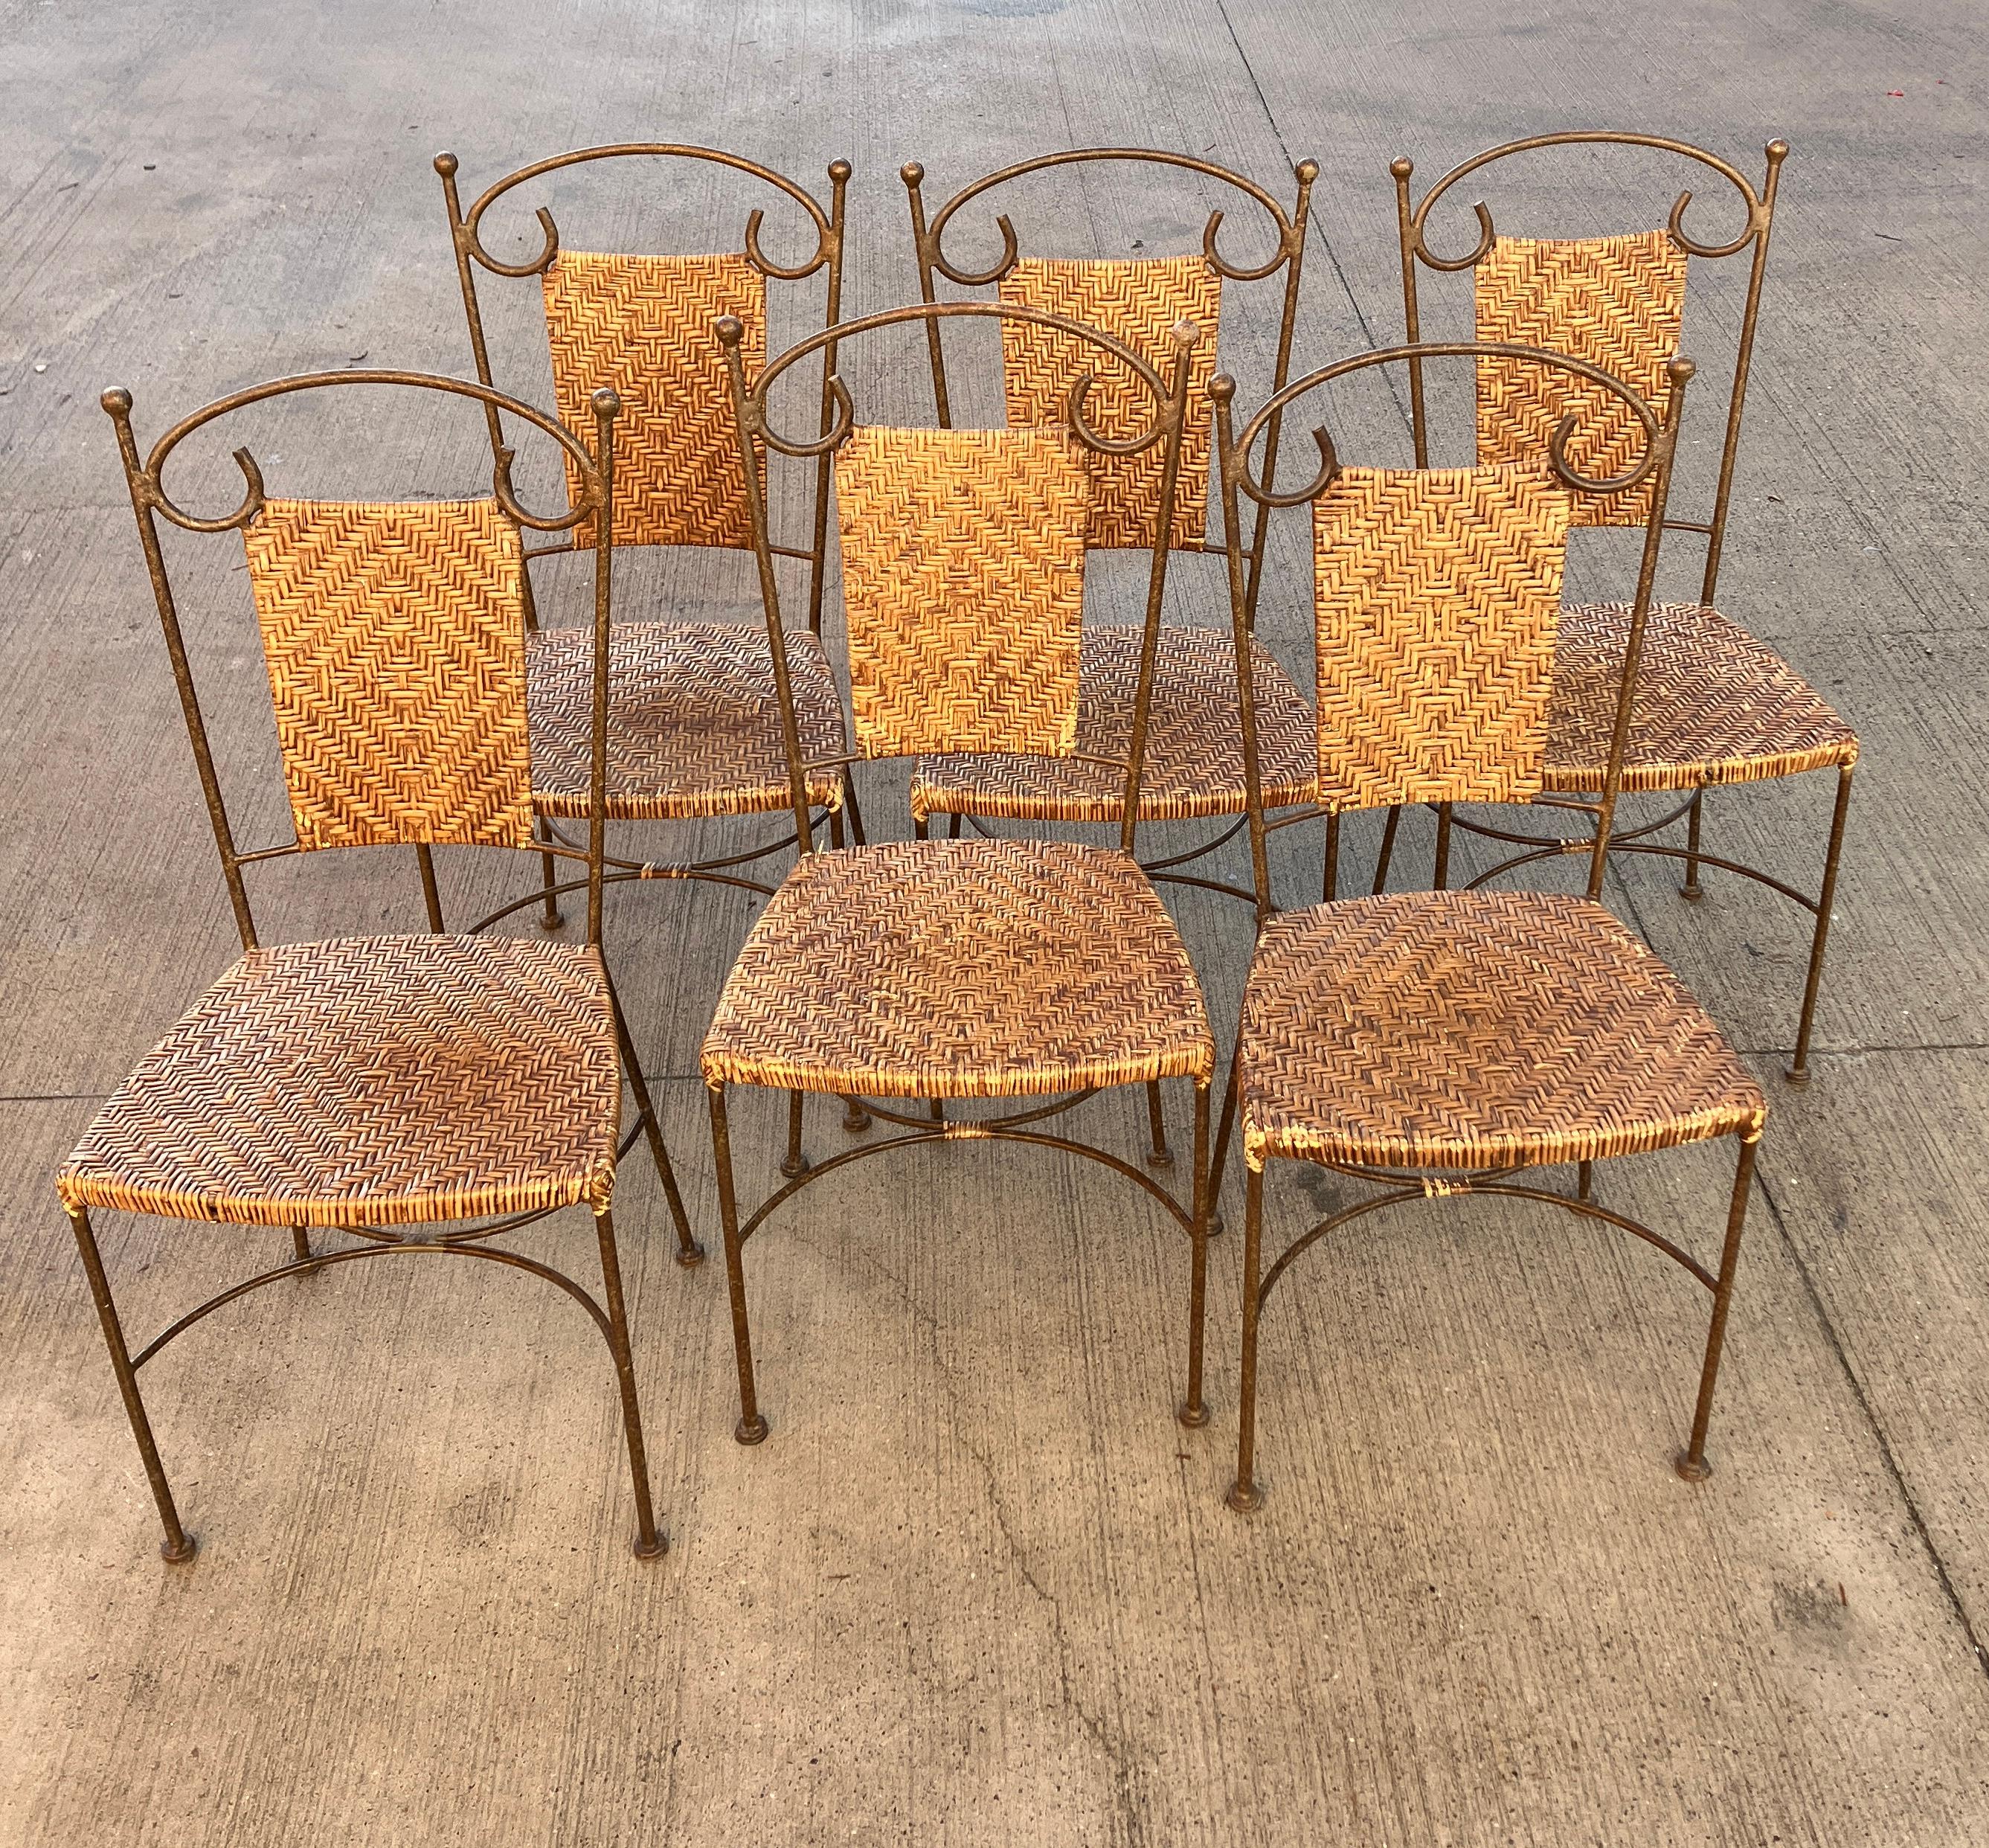 Six vintage dining chairs with gorgeous wrought iron bases and wicker seats and backrests. The wrought iron chairs have a simple elegant form with some curved metalwork for decoration. An attractive vintage dining chair collection.  

The chairs